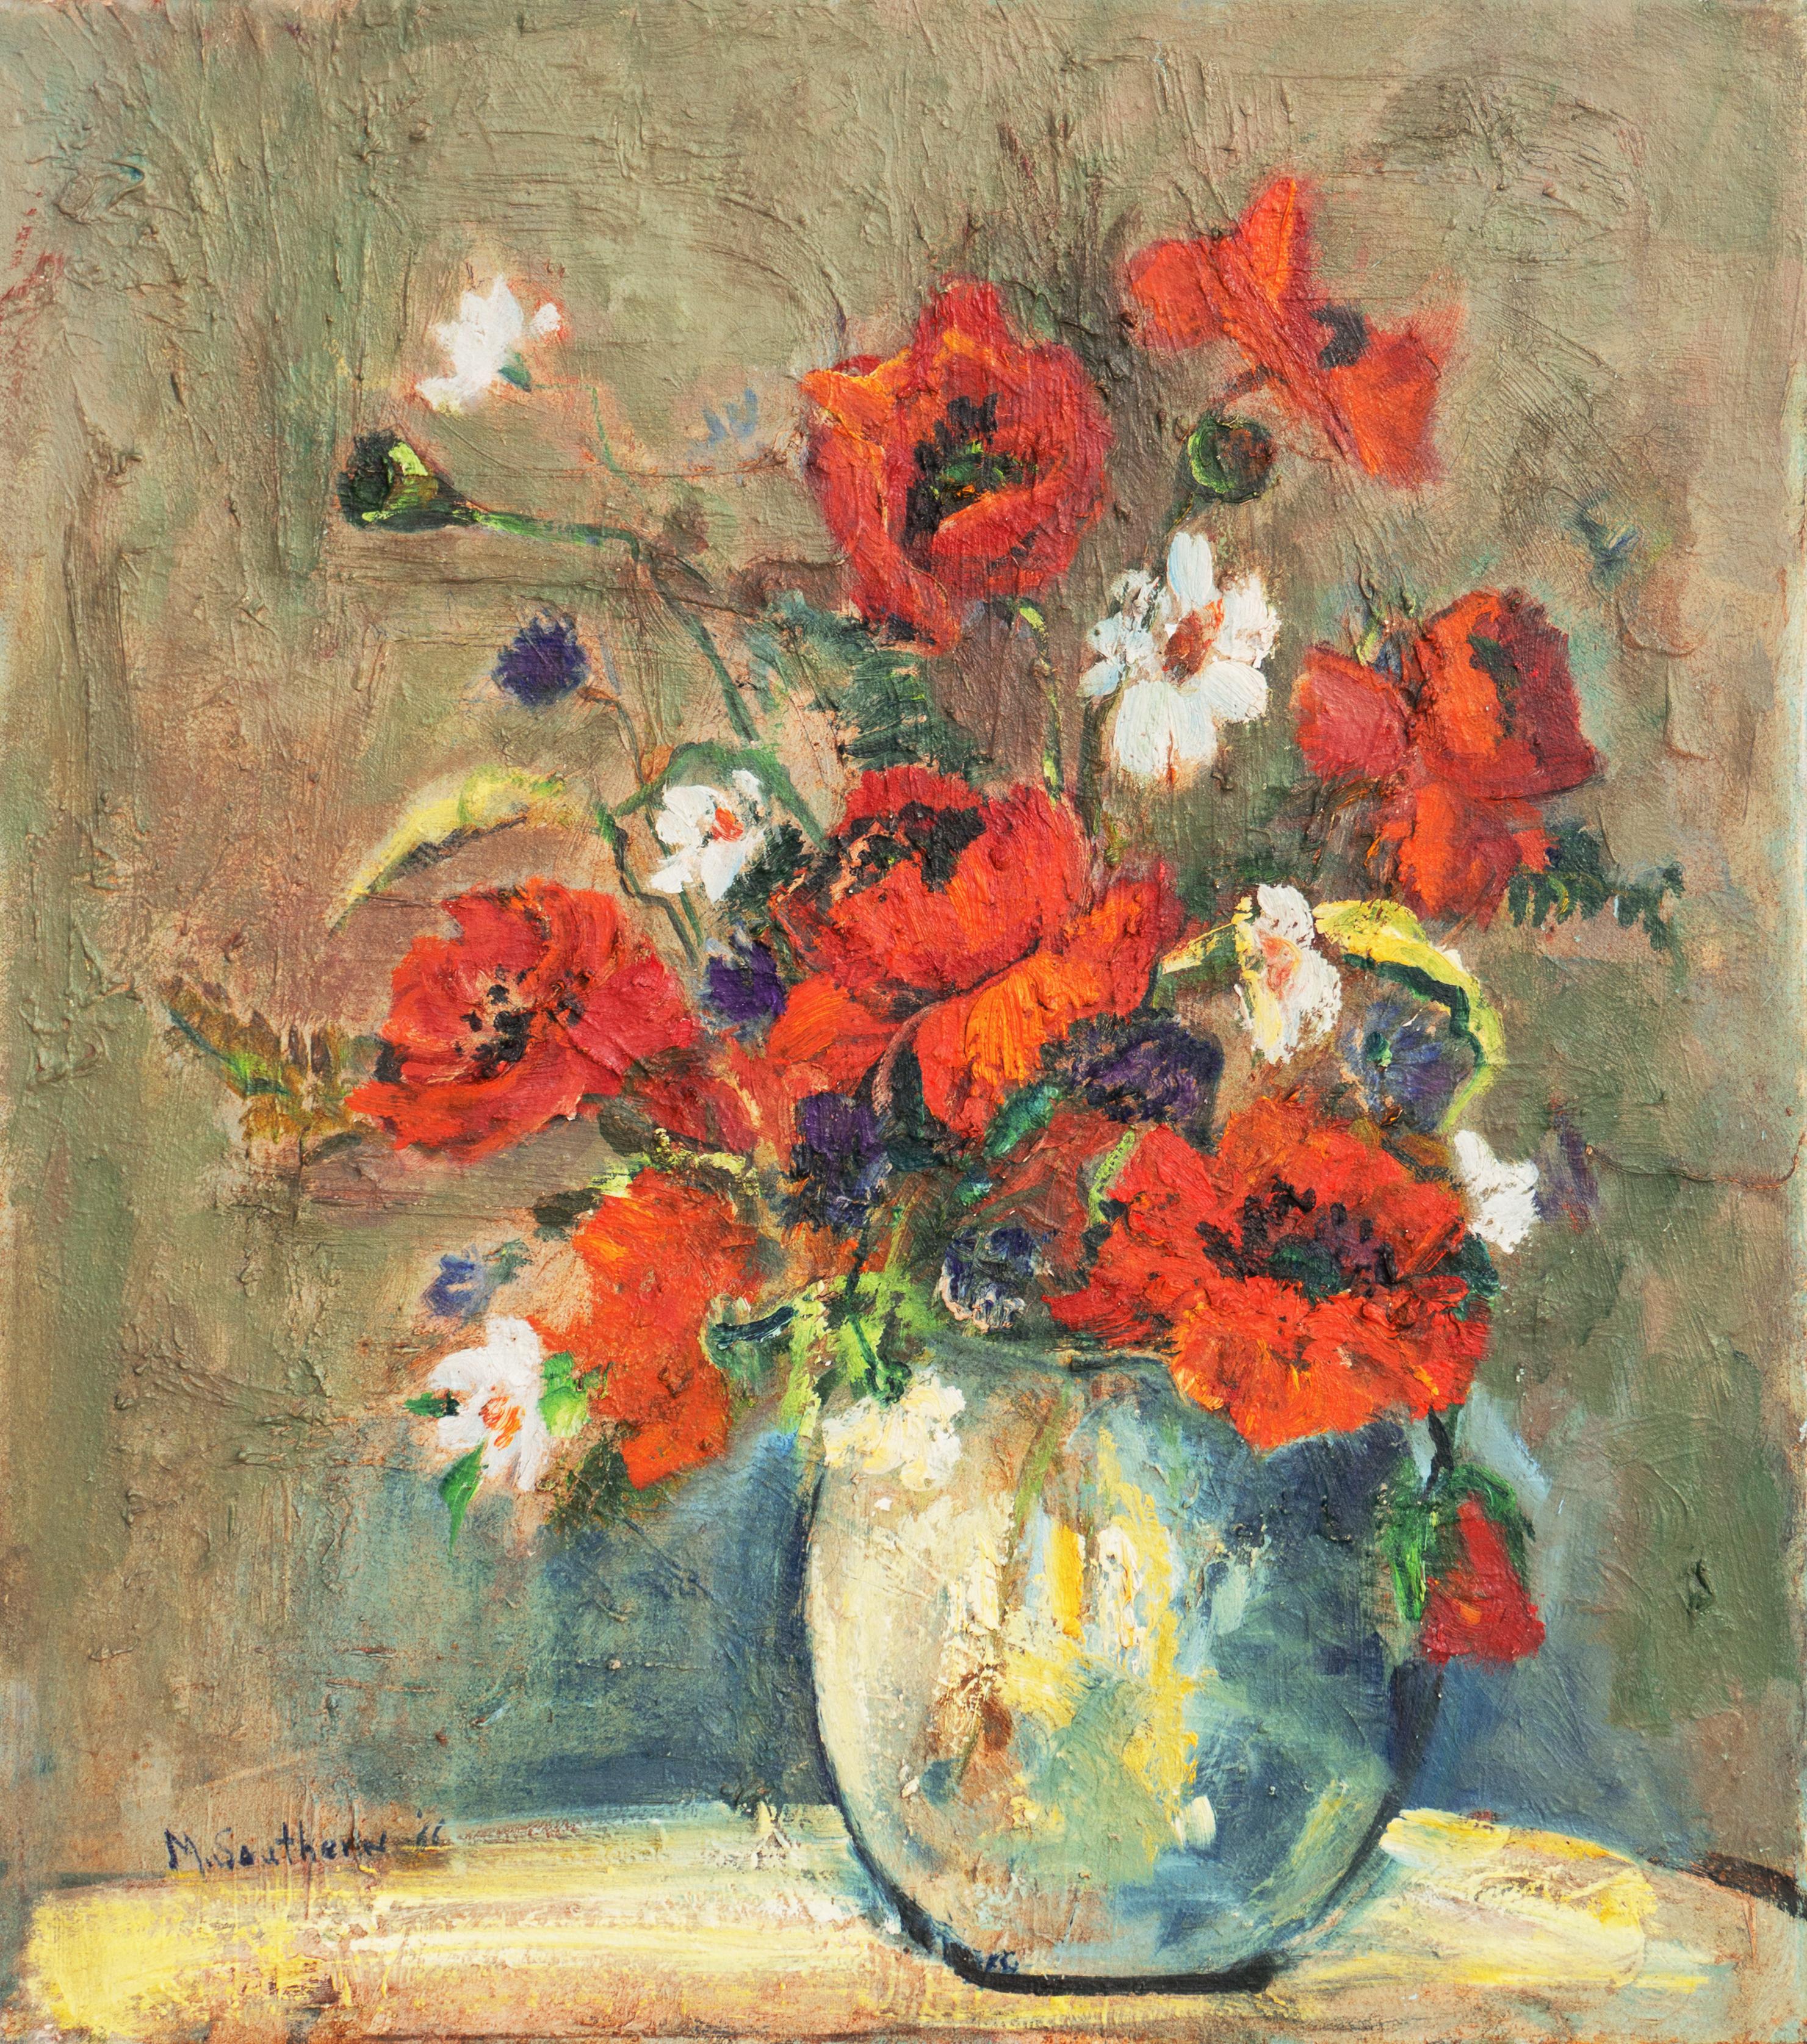 Marjorie Southern Still-Life Painting - 'Still Life of Red Poppies', Mid-century California Expressionist, Woman artist